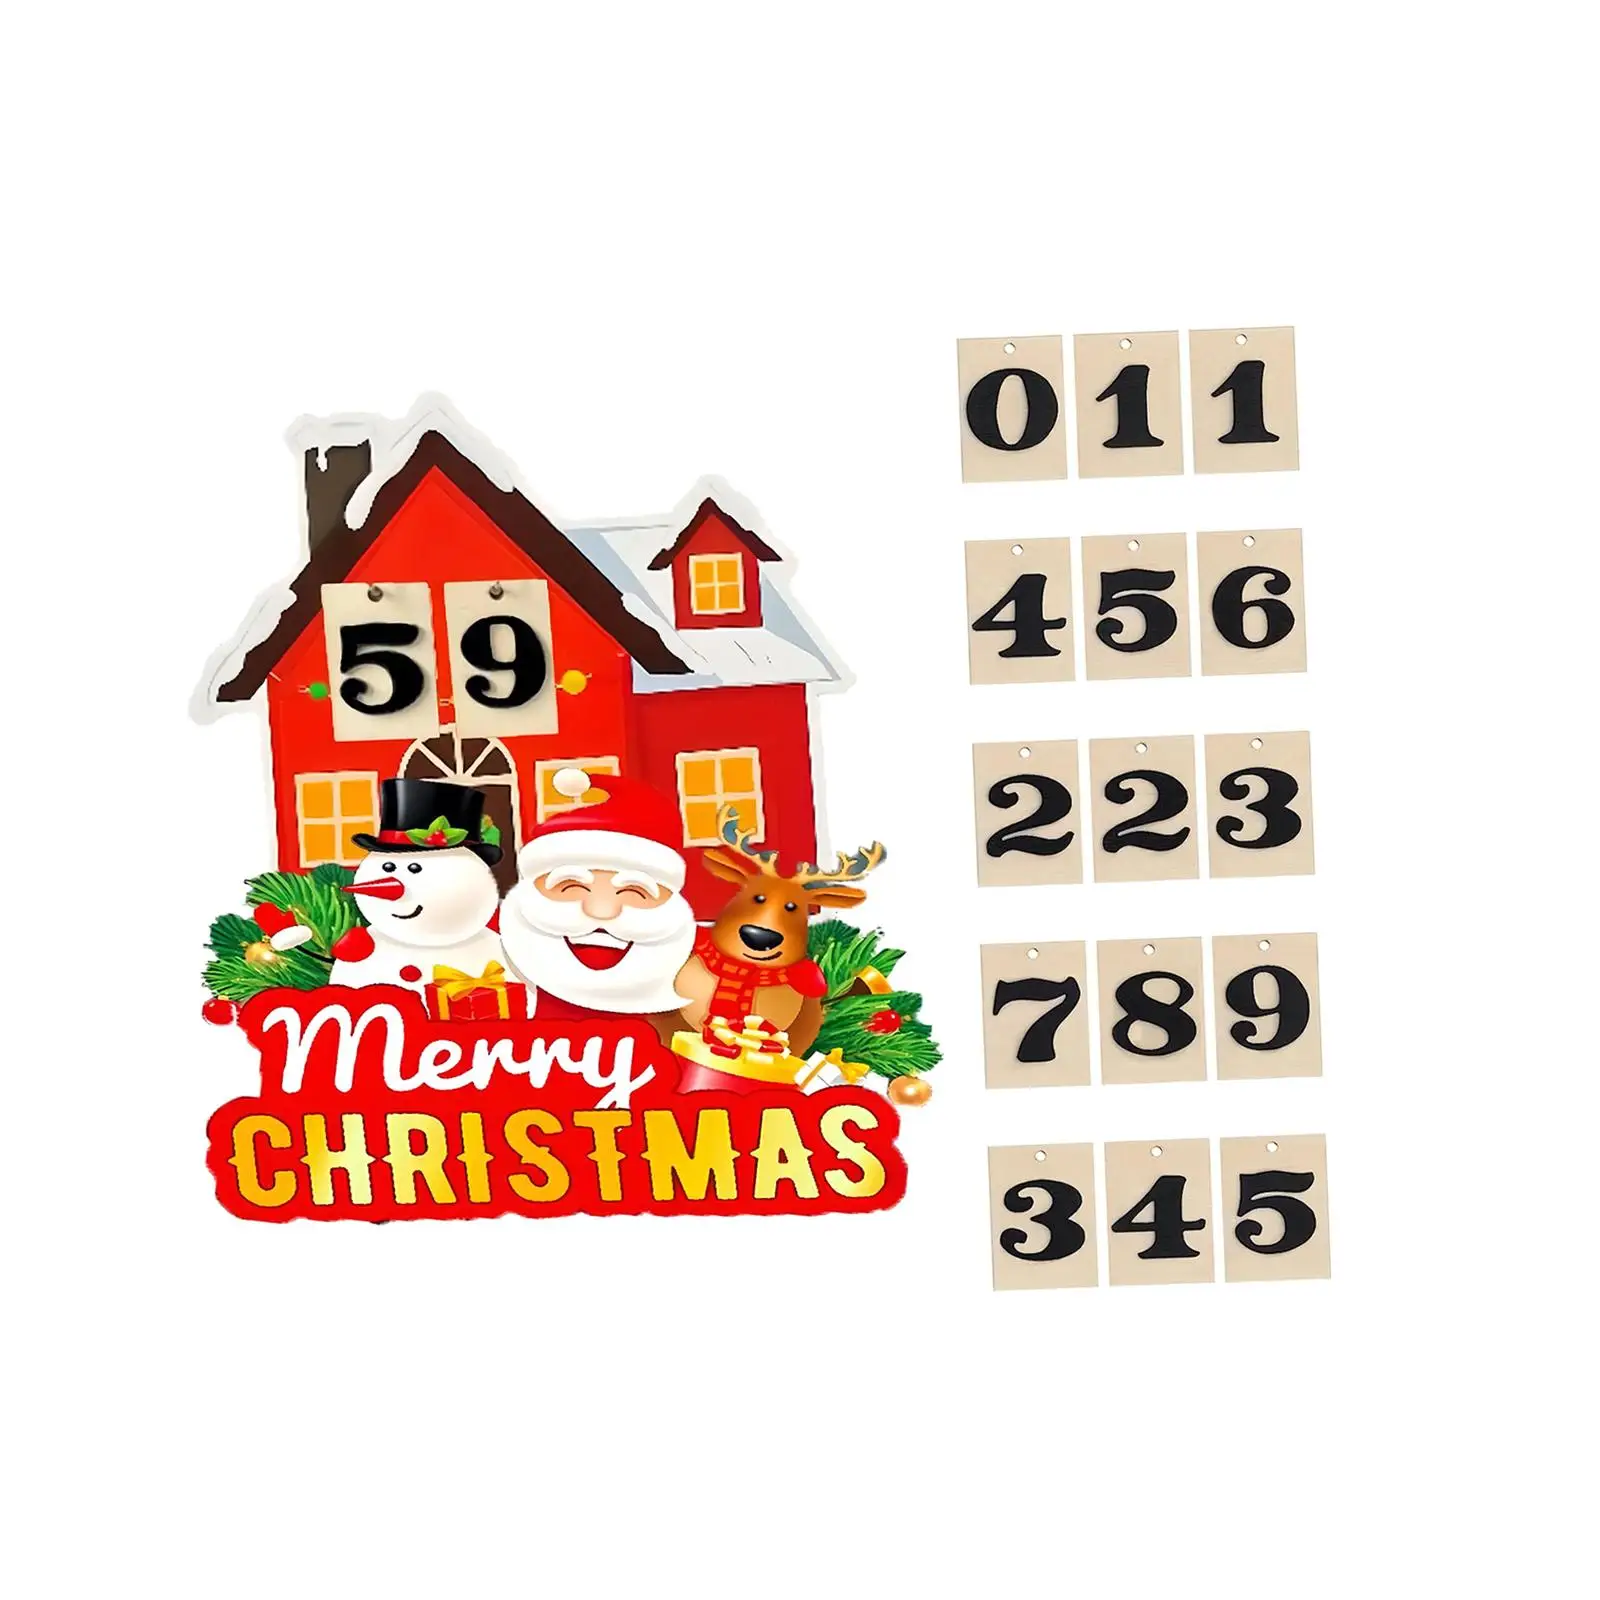 Christmas Advent Calendar Practical Lovely Holiday Gifts Home Ornaments Crafts for Outdoor Classroom Desk Bedroom Fireplace